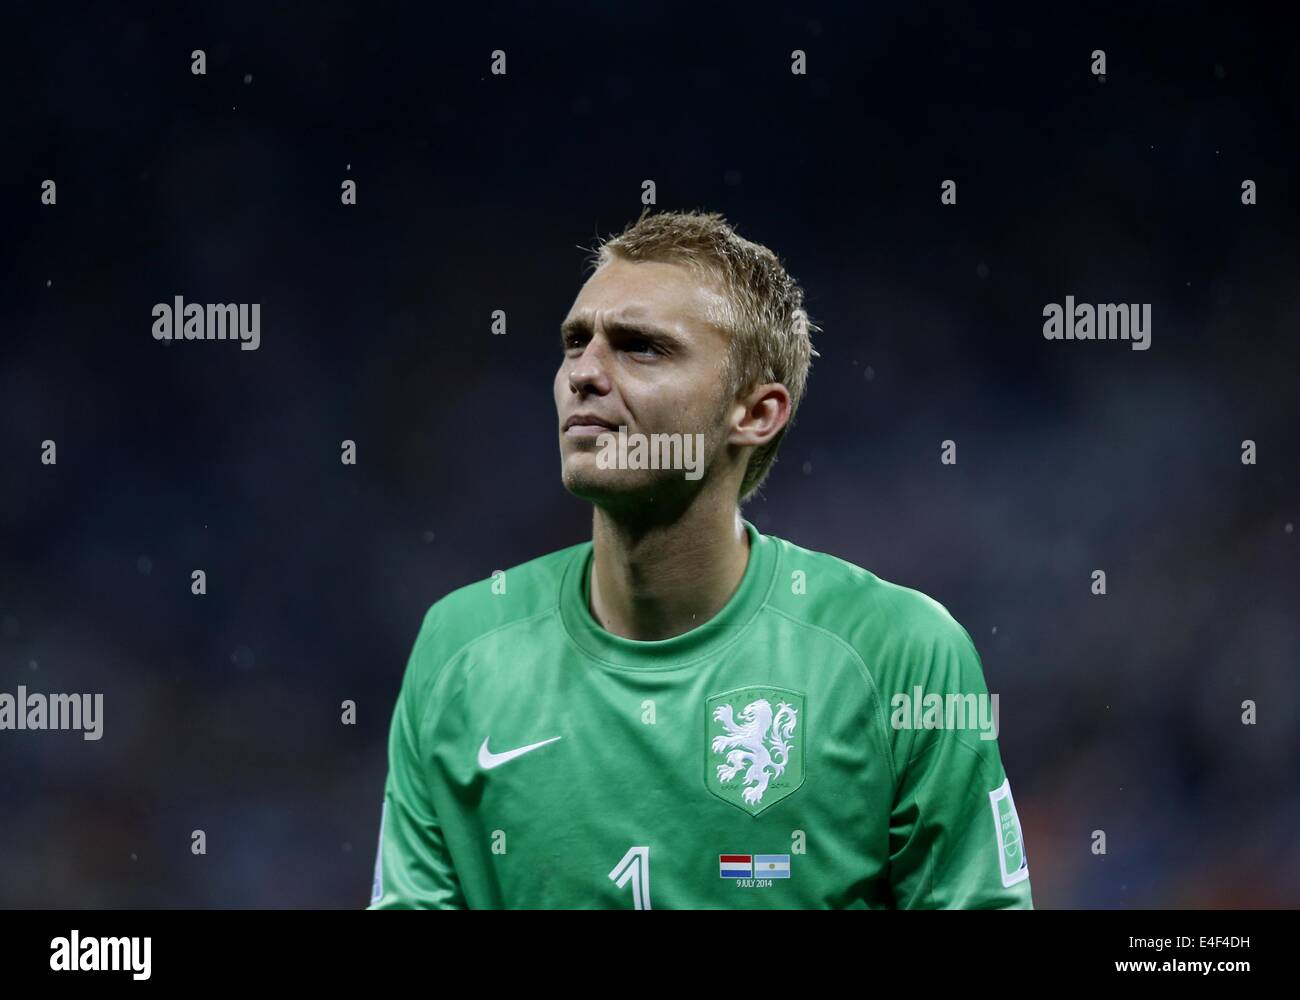 Sao Paulo, Brazil. 9th July, 2014. Netherlands' goalkeeper Jasper Cillessen reacts after the penalty shoot-out of a semifinal match between Netherlands and Argentina of 2014 FIFA World Cup at the Arena de Sao Paulo Stadium in Sao Paulo, Brazil, on July 9, 2014. Argentina won 4-2 on penalties over Netherlands after a 0-0 tie and qualified for the final on Wednesday. Credit:  Liao Yujie/Xinhua/Alamy Live News Stock Photo